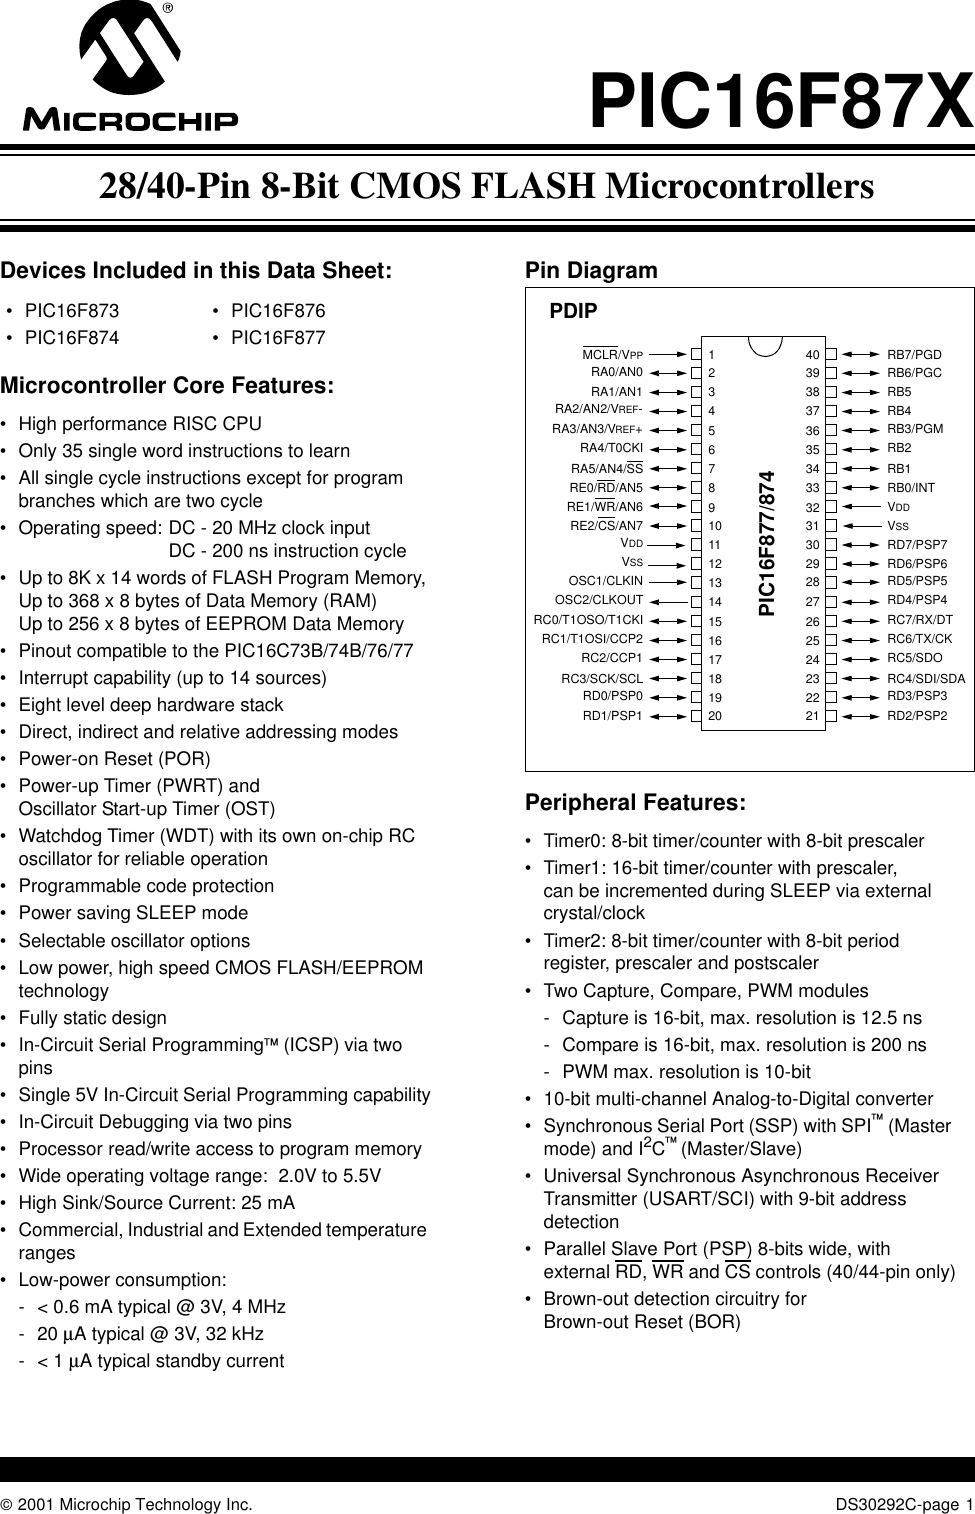  2001 Microchip Technology Inc. DS30292C-page 1PIC16F87XDevices Included in this Data Sheet:Microcontroller Core Features:•High performance RISC CPU•Only 35 single word instructions to learn•All single cycle instructions except for program branches which are two cycle•Operating speed: DC - 20 MHz clock inputDC - 200 ns instruction cycle•Up to 8K x 14 words of FLASH Program Memory, Up to 368 x 8 bytes of Data Memory (RAM)Up to 256 x 8 bytes of EEPROM Data Memory•Pinout compatible to the PIC16C73B/74B/76/77•Interrupt capability (up to 14 sources)•Eight level deep hardware stack•Direct, indirect and relative addressing modes•Power-on Reset (POR)•Power-up Timer (PWRT) andOscillator Start-up Timer (OST) •Watchdog Timer (WDT) with its own on-chip RC oscillator for reliable operation•Programmable code protection•Power saving SLEEP mode•Selectable oscillator options•Low power, high speed CMOS FLASH/EEPROM technology•Fully static design•In-Circuit Serial Programming (ICSP) via two pins•Single 5V In-Circuit Serial Programming capability•In-Circuit Debugging via two pins•Processor read/write access to program memory•Wide operating voltage range:  2.0V to 5.5V•High Sink/Source Current: 25 mA•Commercial, Industrial and Extended temperature ranges•Low-power consumption: - &lt; 0.6 mA typical @ 3V, 4 MHz-20 µA typical @ 3V, 32 kHz-&lt; 1 µA typical standby currentPin Diagram Peripheral Features:•Timer0: 8-bit timer/counter with 8-bit prescaler•Timer1: 16-bit timer/counter with prescaler,can be incremented during SLEEP via external crystal/clock•Timer2: 8-bit timer/counter with 8-bit periodregister, prescaler and postscaler •Two Capture, Compare, PWM modules- Capture is 16-bit, max. resolution is 12.5 ns- Compare is 16-bit, max. resolution is 200 ns- PWM max. resolution is 10-bit•10-bit multi-channel Analog-to-Digital converter•Synchronous Serial Port (SSP) with SPI (Master mode) and I2C (Master/Slave)•Universal Synchronous Asynchronous Receiver Transmitter (USART/SCI) with 9-bit address detection•Parallel Slave Port (PSP) 8-bits wide, withexternal RD, WR and CS controls (40/44-pin only)•Brown-out detection circuitry forBrown-out Reset (BOR)•PIC16F873•PIC16F874•PIC16F876•PIC16F877 RB7/PGDRB6/PGCRB5RB4RB3/PGMRB2RB1RB0/INTVDDVSSRD7/PSP7RD6/PSP6RD5/PSP5RD4/PSP4RC7/RX/DTRC6/TX/CKRC5/SDORC4/SDI/SDARD3/PSP3RD2/PSP2MCLR/VPPRA0/AN0RA1/AN1RA2/AN2/VREF-RA3/AN3/VREF+RA4/T0CKIRA5/AN4/SSRE0/RD/AN5RE1/WR/AN6RE2/CS/AN7VDDVSSOSC1/CLKINOSC2/CLKOUTRC0/T1OSO/T1CKIRC1/T1OSI/CCP2RC2/CCP1RC3/SCK/SCLRD0/PSP0RD1/PSP112345678910111213141516171819204039383736353433323130292827262524232221PIC16F877/874PDIP28/40-Pin 8-Bit CMOS FLASH Microcontrollers